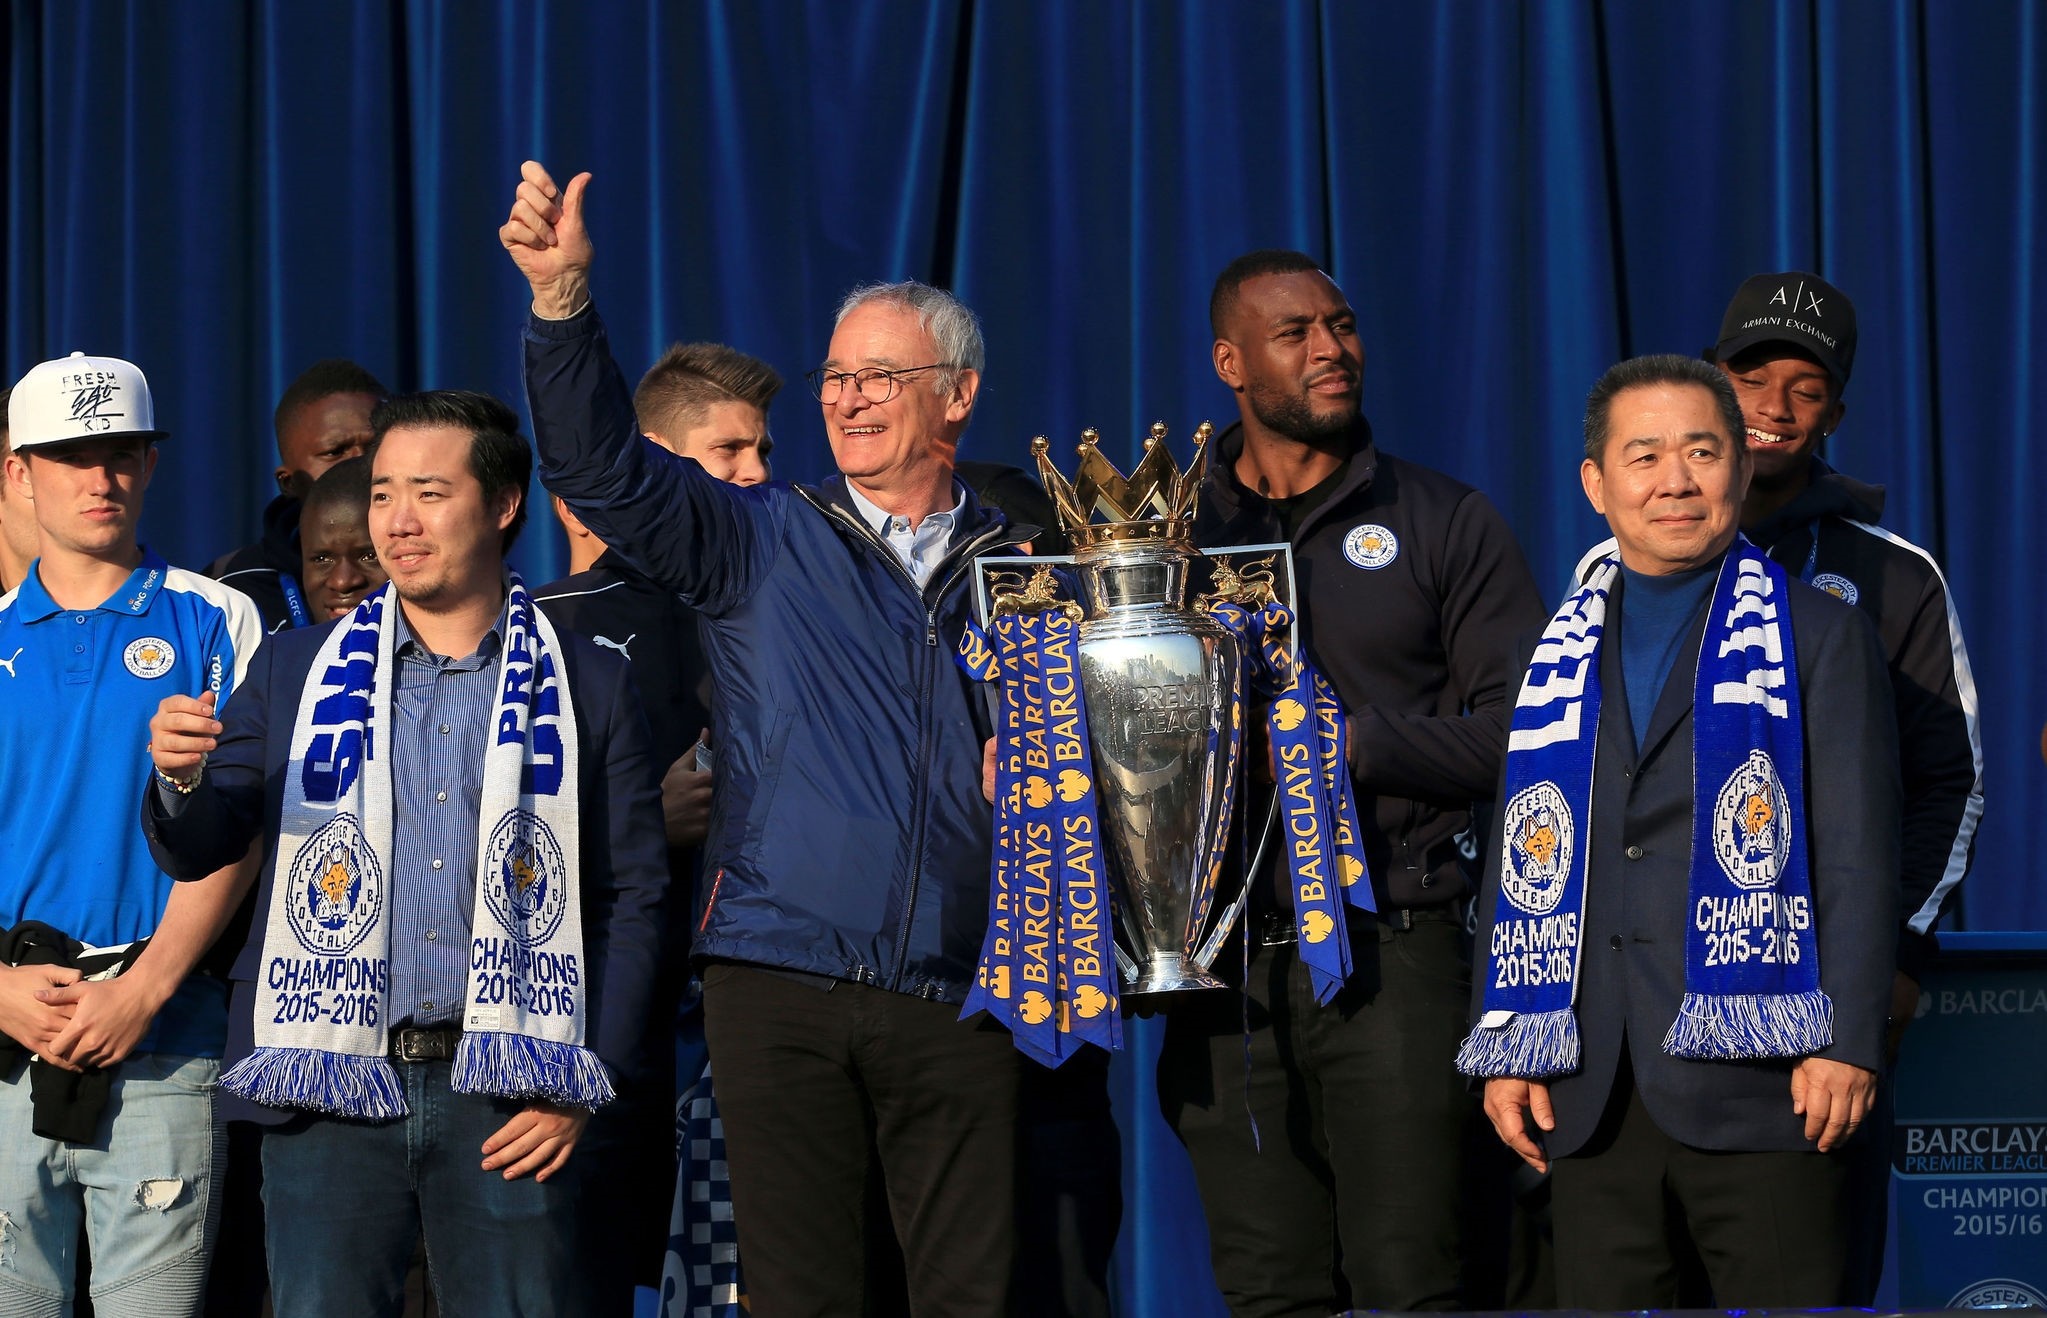 Leicester City's manager Claudio Ranieri holds the trophy alongside Chairman Vichai Srivaddhanaprabha (R) during celebrations for winning the English Premier league title at Victoria Park May 16, 2016. (AP Photo)